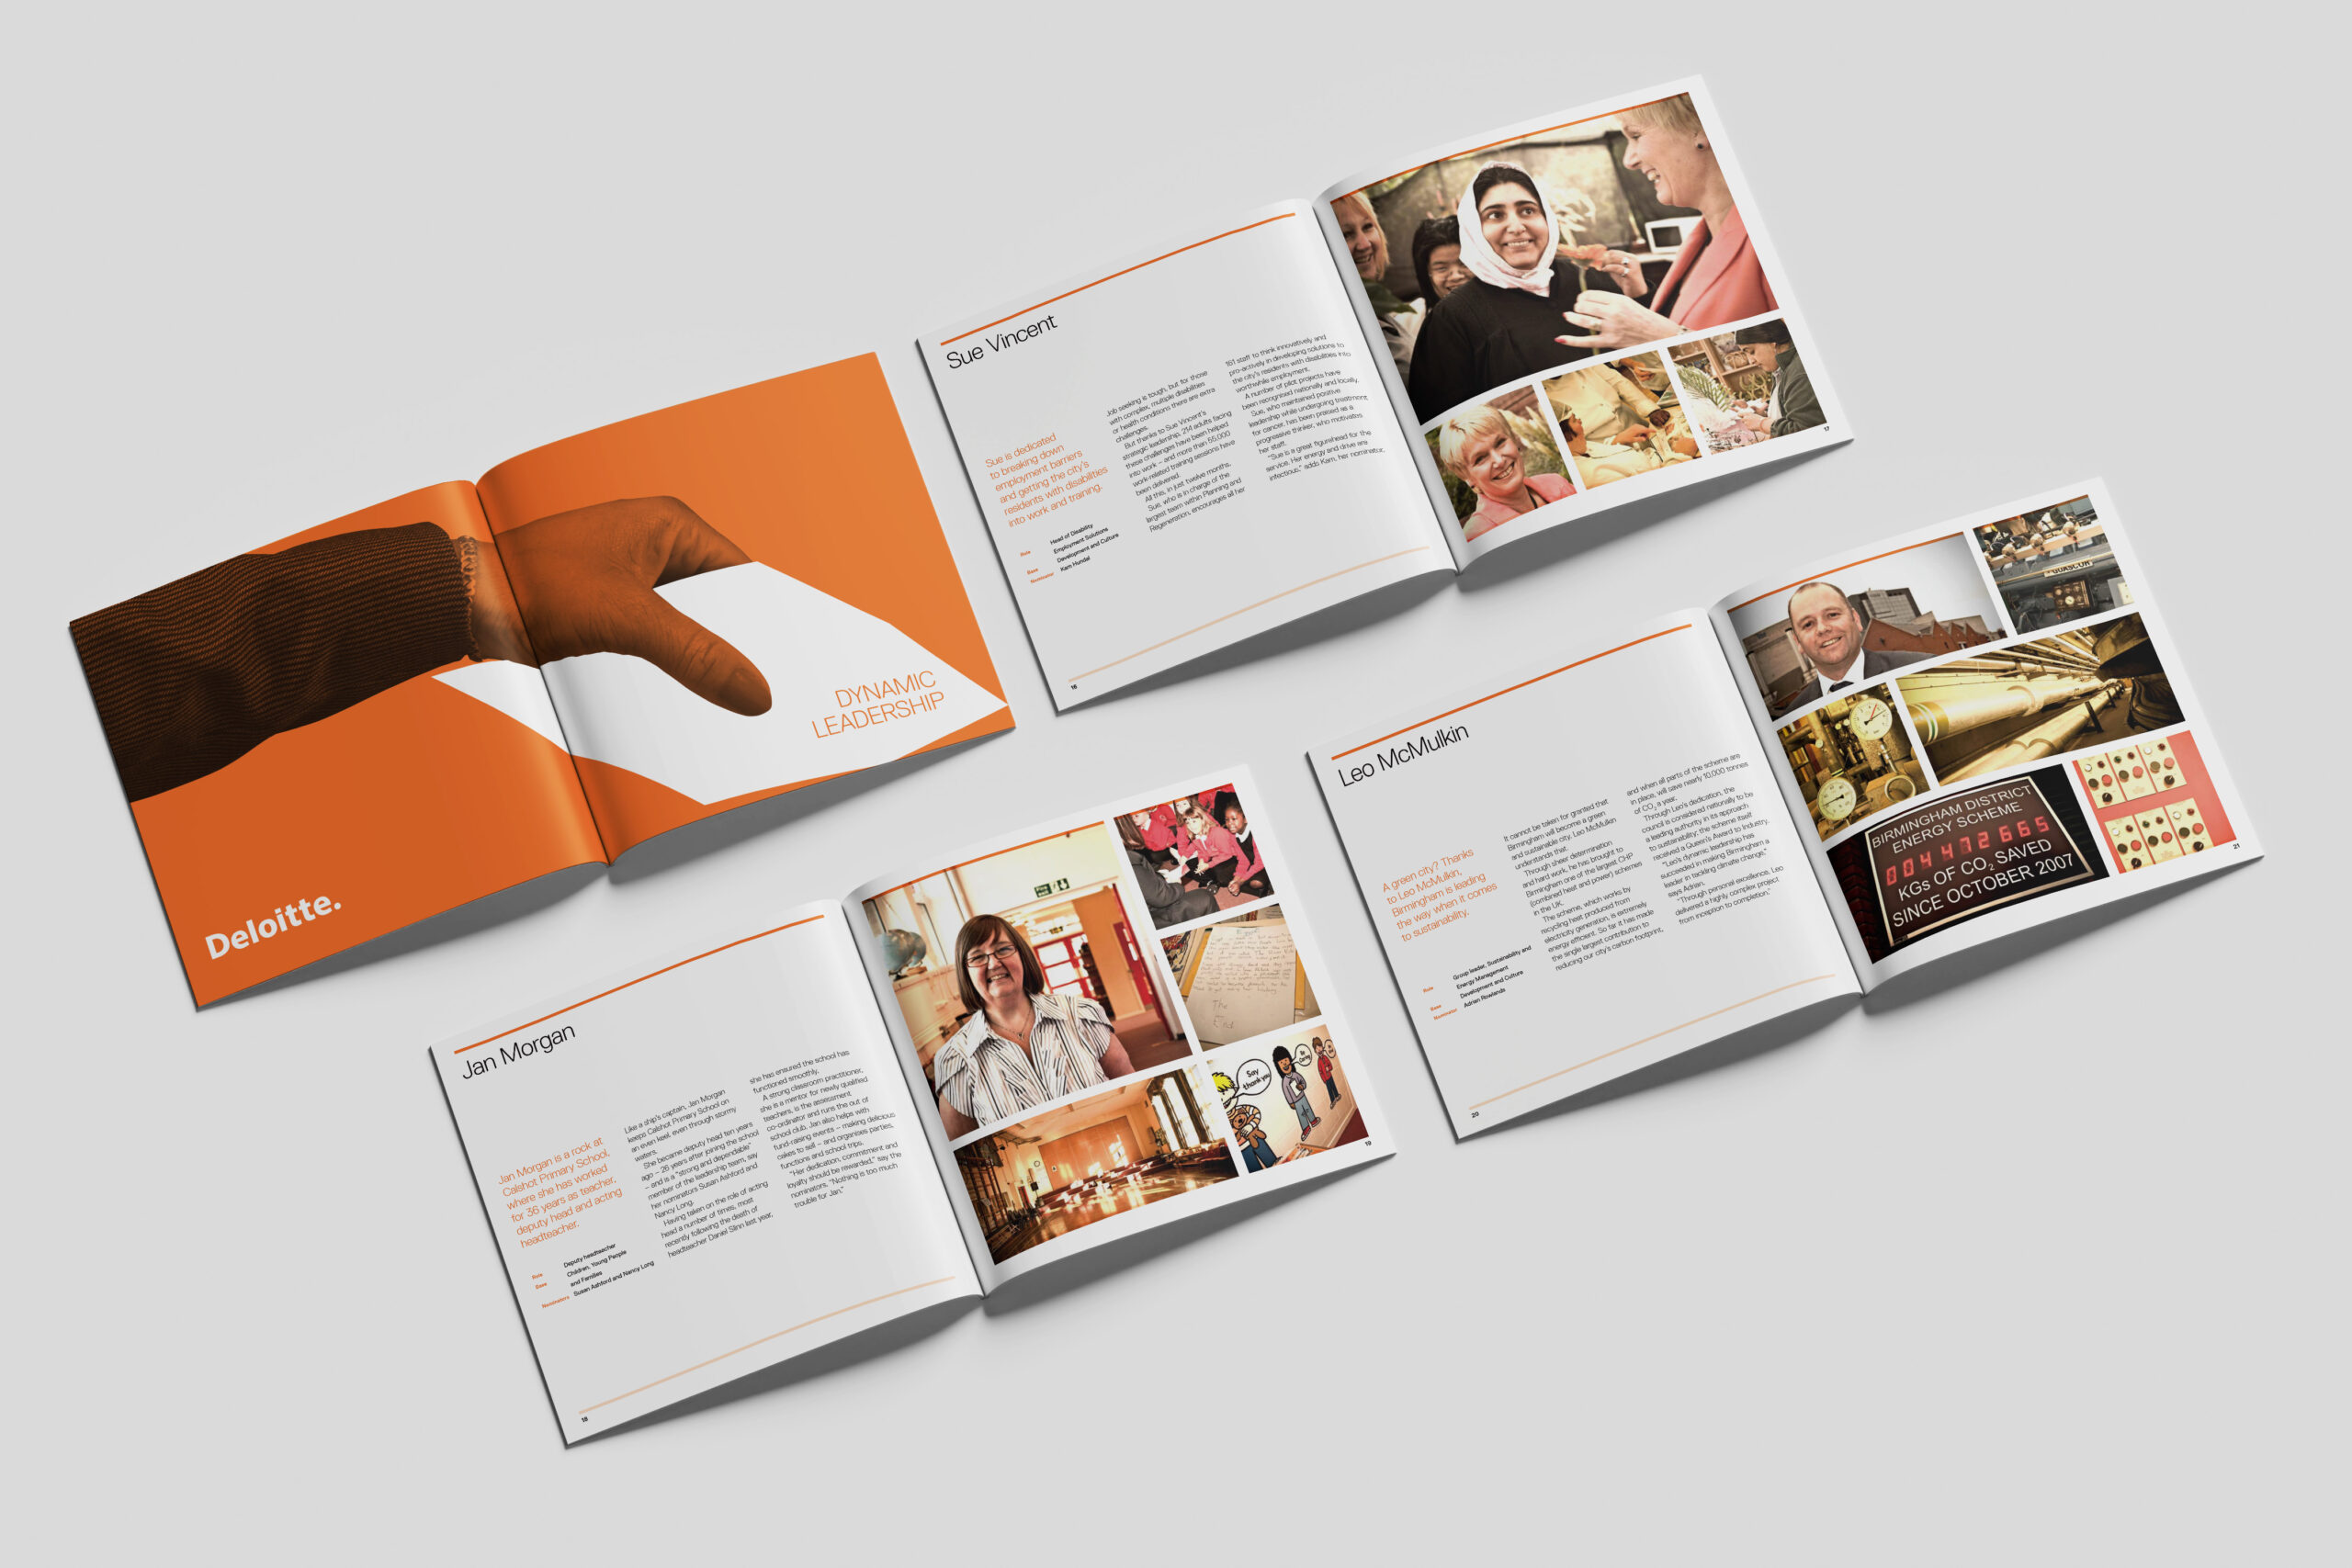 A selection of double page spreads from the Chamberlain Awards 2009 brochure are arranged in a grid. The left hand side of each spread contains the finalist's name and story, with various reportage-style photographs of the finalist in their workplace arranged in a grid on the right-hand side.